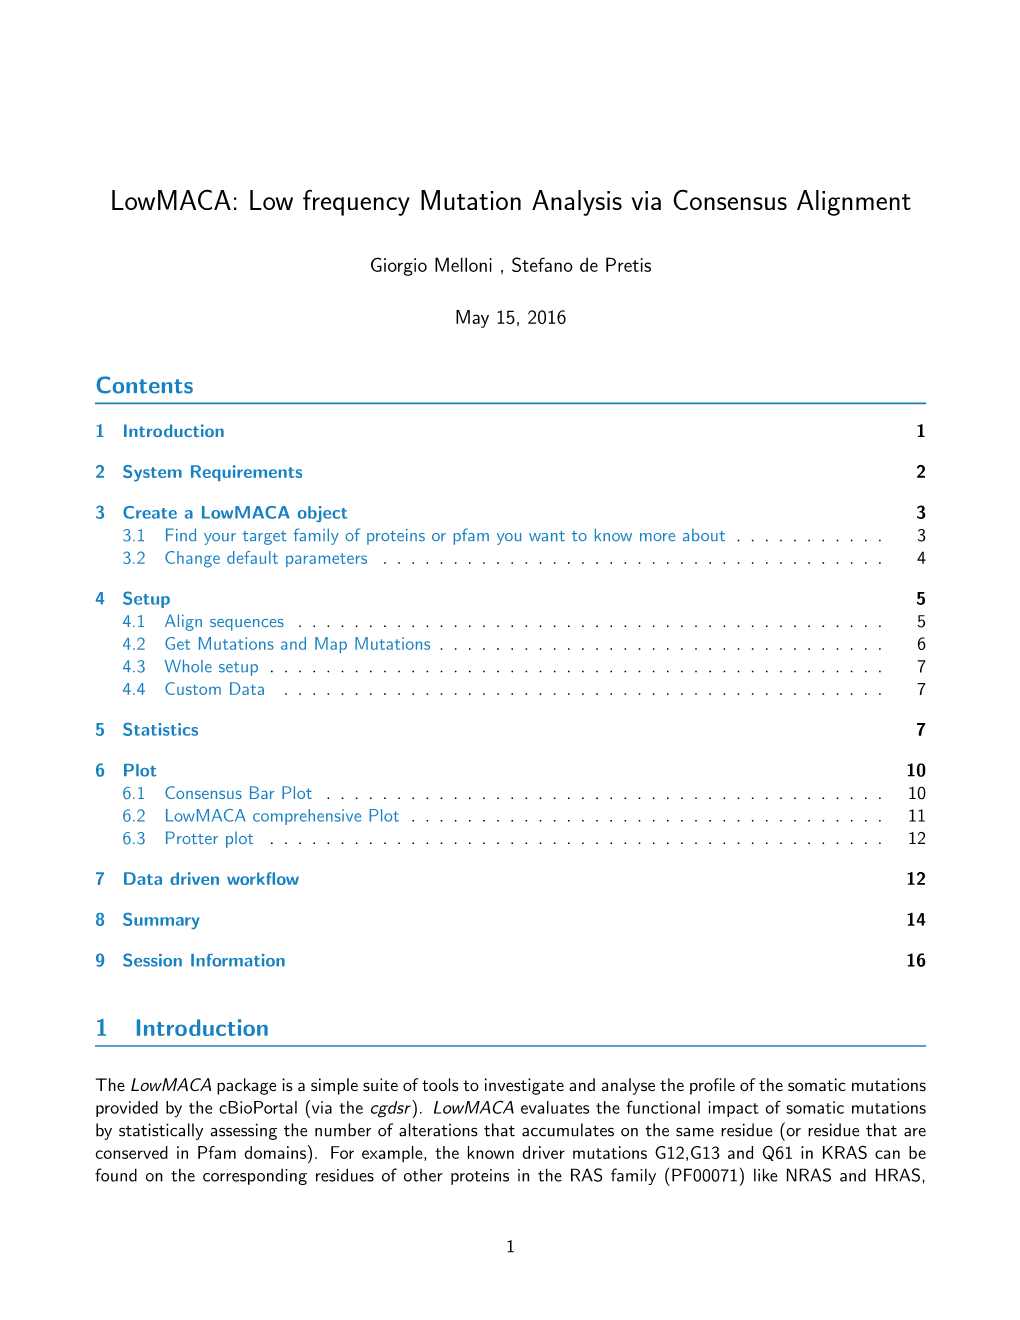 Lowmaca: Low Frequency Mutation Analysis Via Consensus Alignment